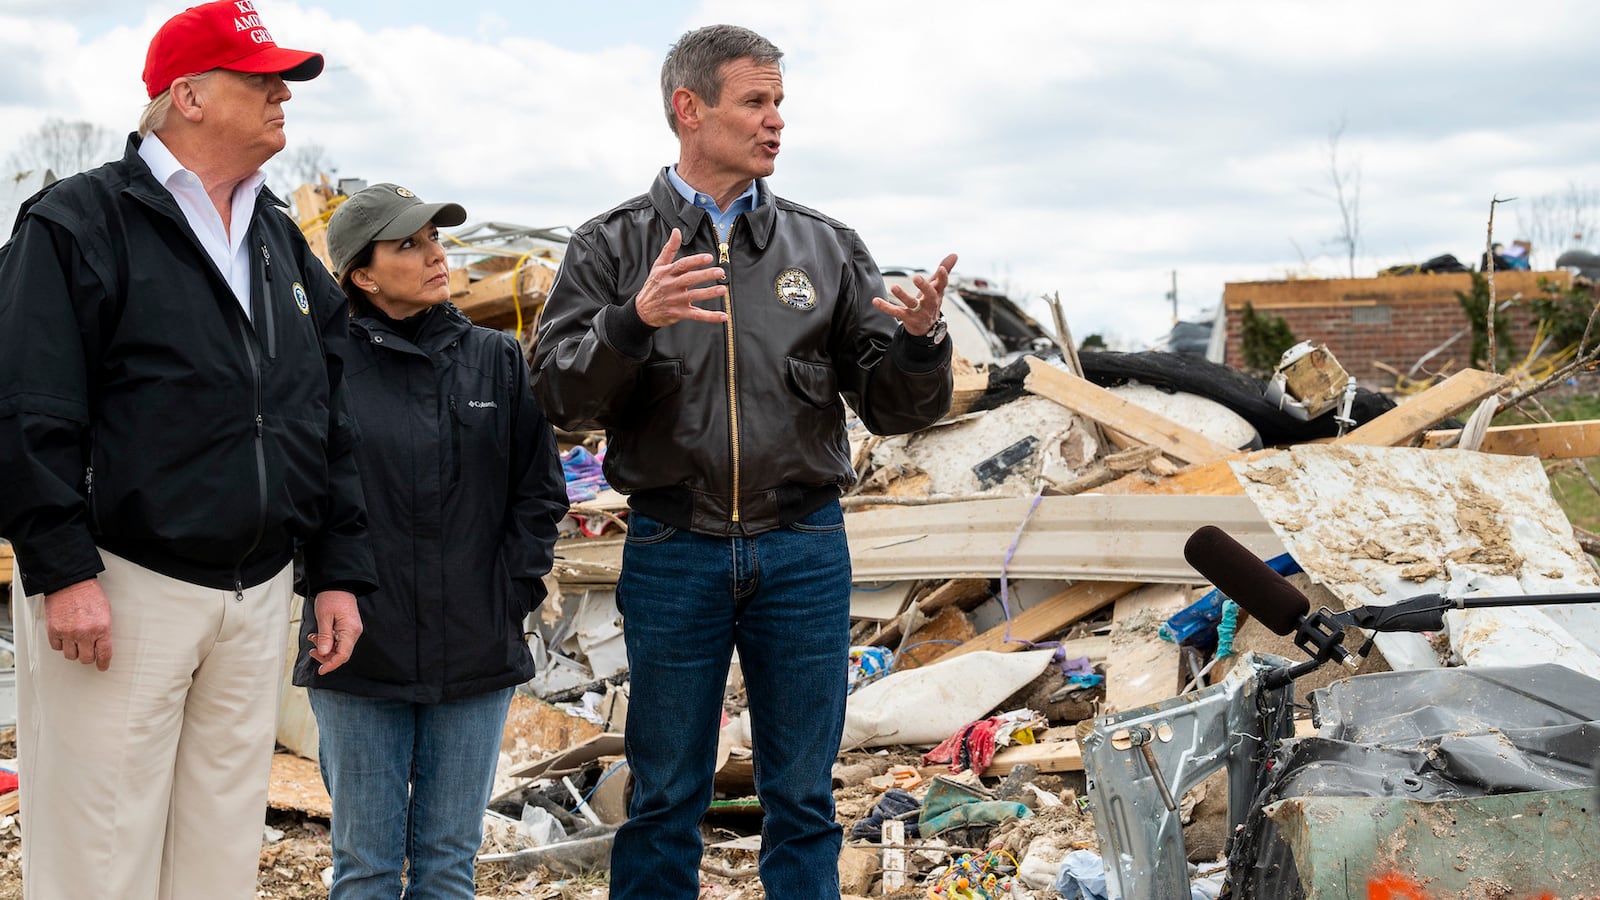 Gov. Bill Lee and his wife, Maria, join President Donald Trump on a March 6 tour of damage caused when tornadoes thrashed parts of Middle Tennessee on March 4.